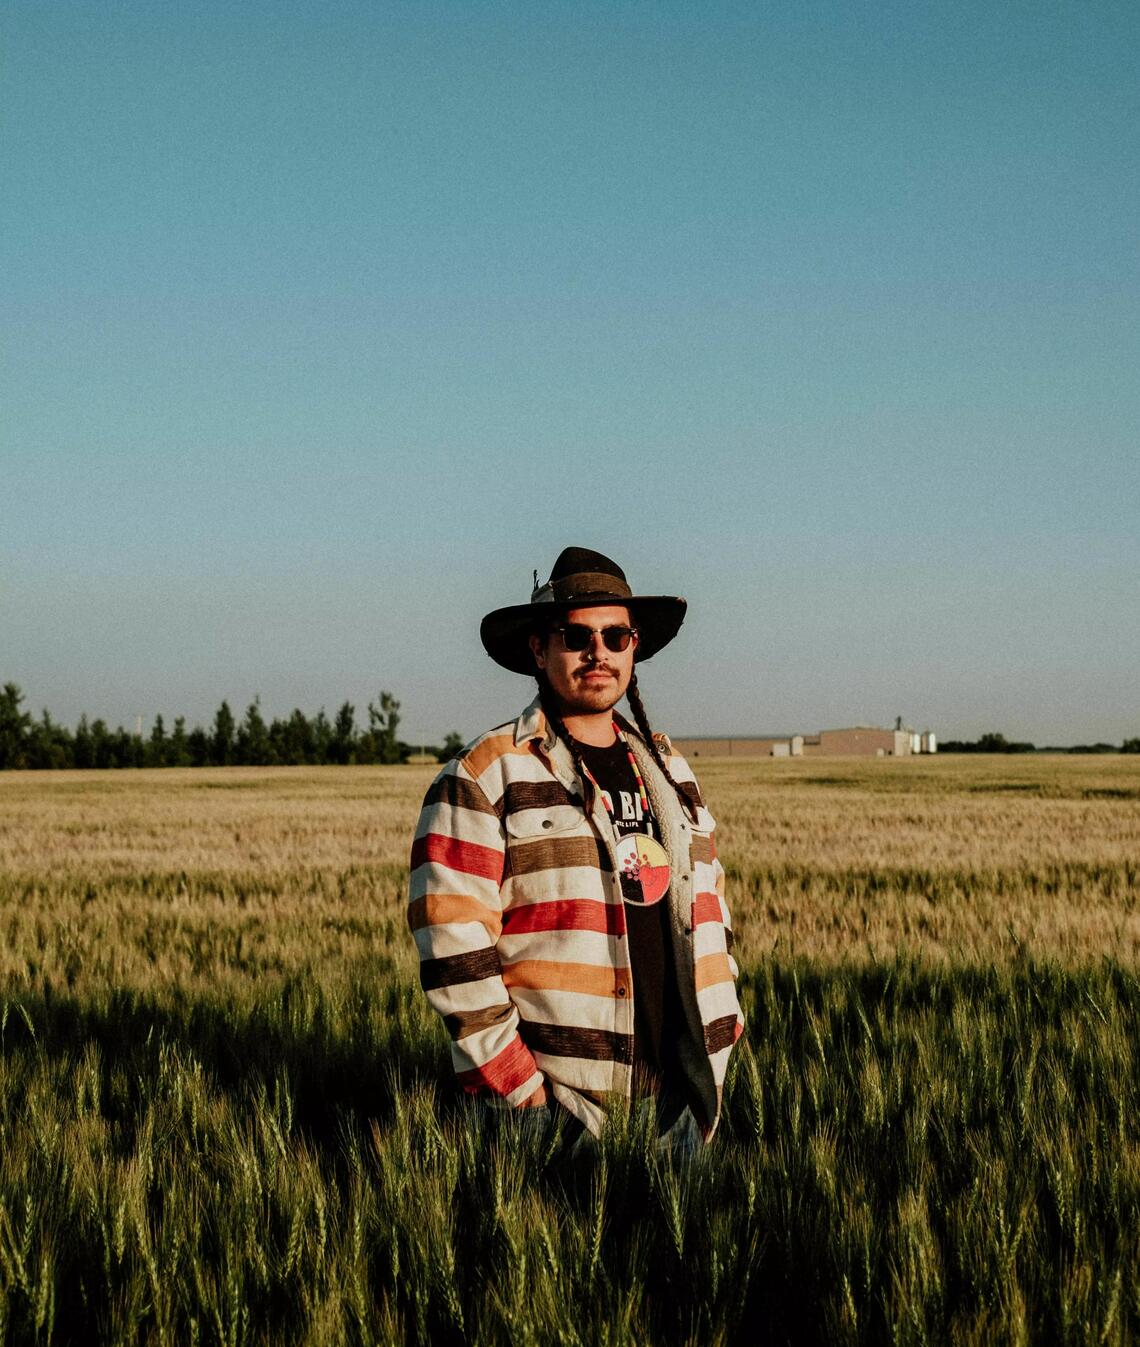 A man wearing a striped shirt and large hat stands in a field